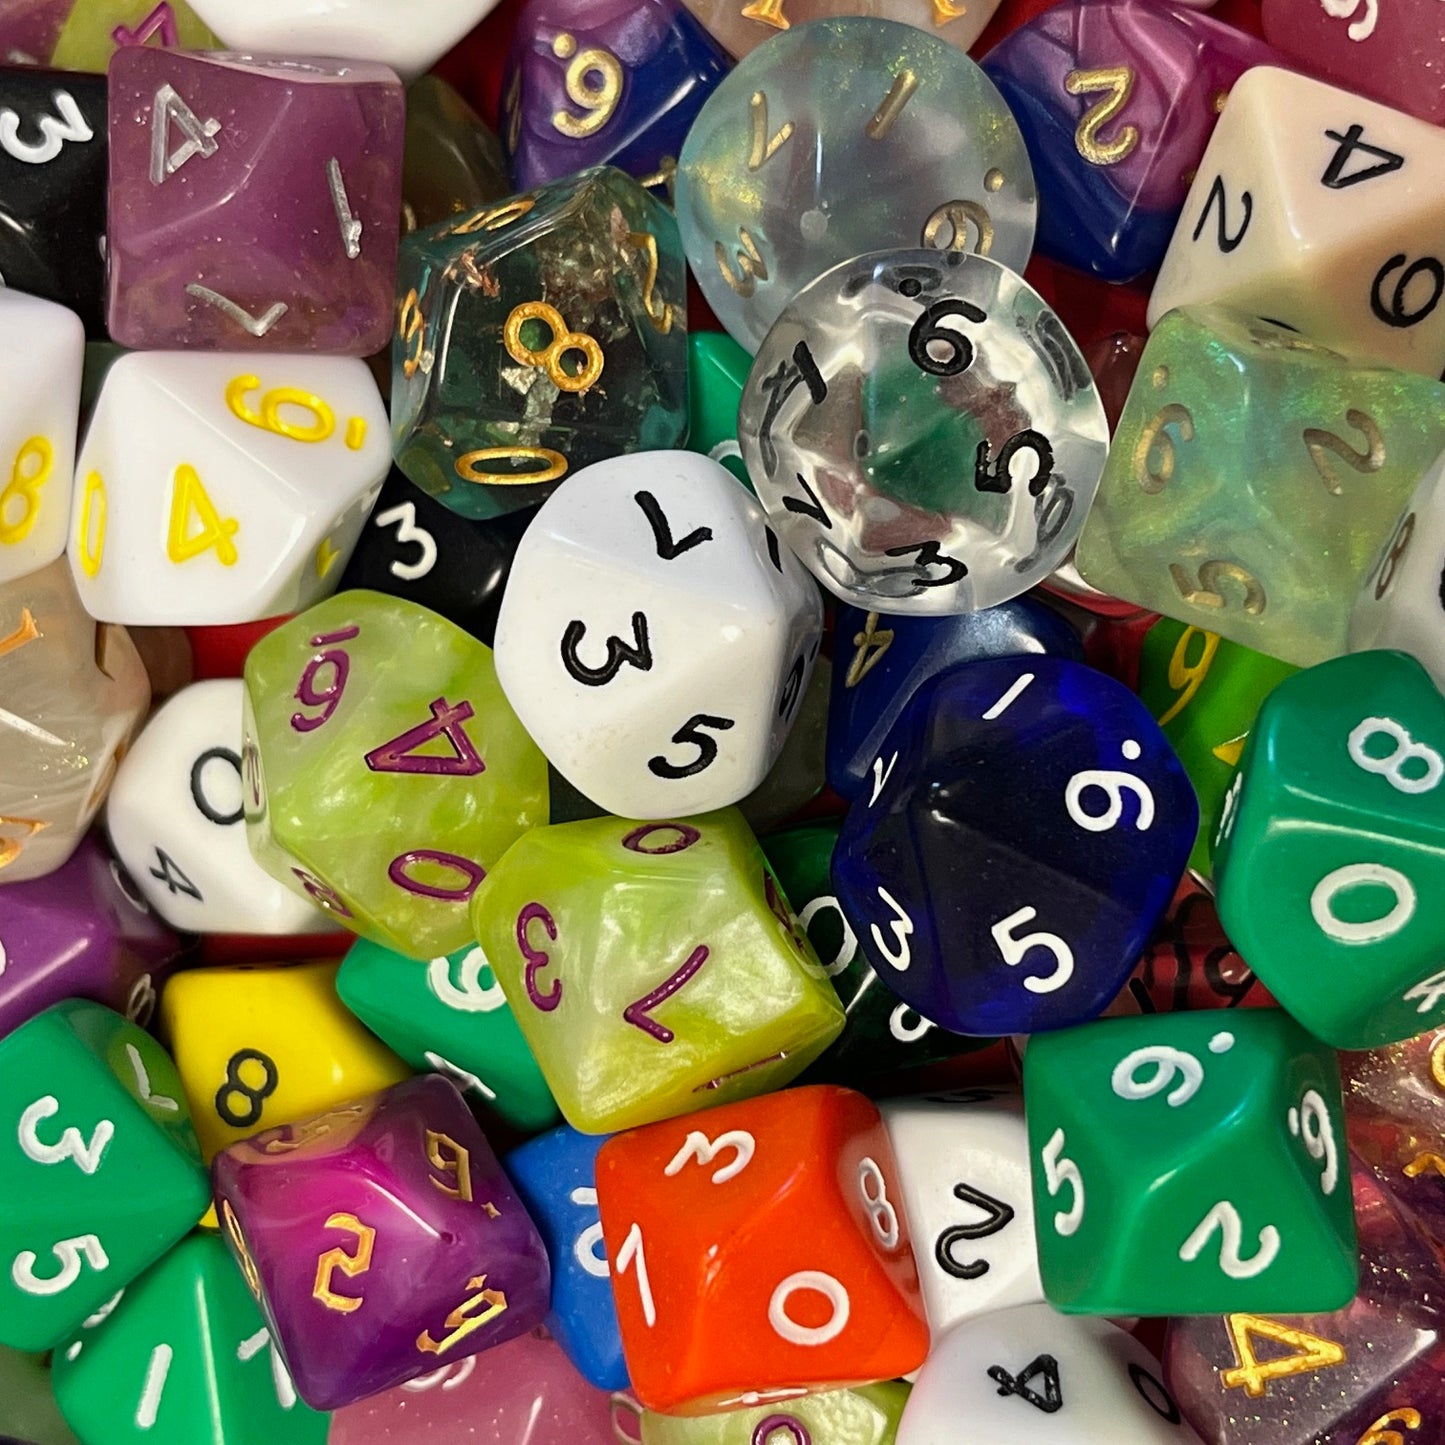 Random D10 TTRPG dice sets for DND and role playing games and dice goblin collectors